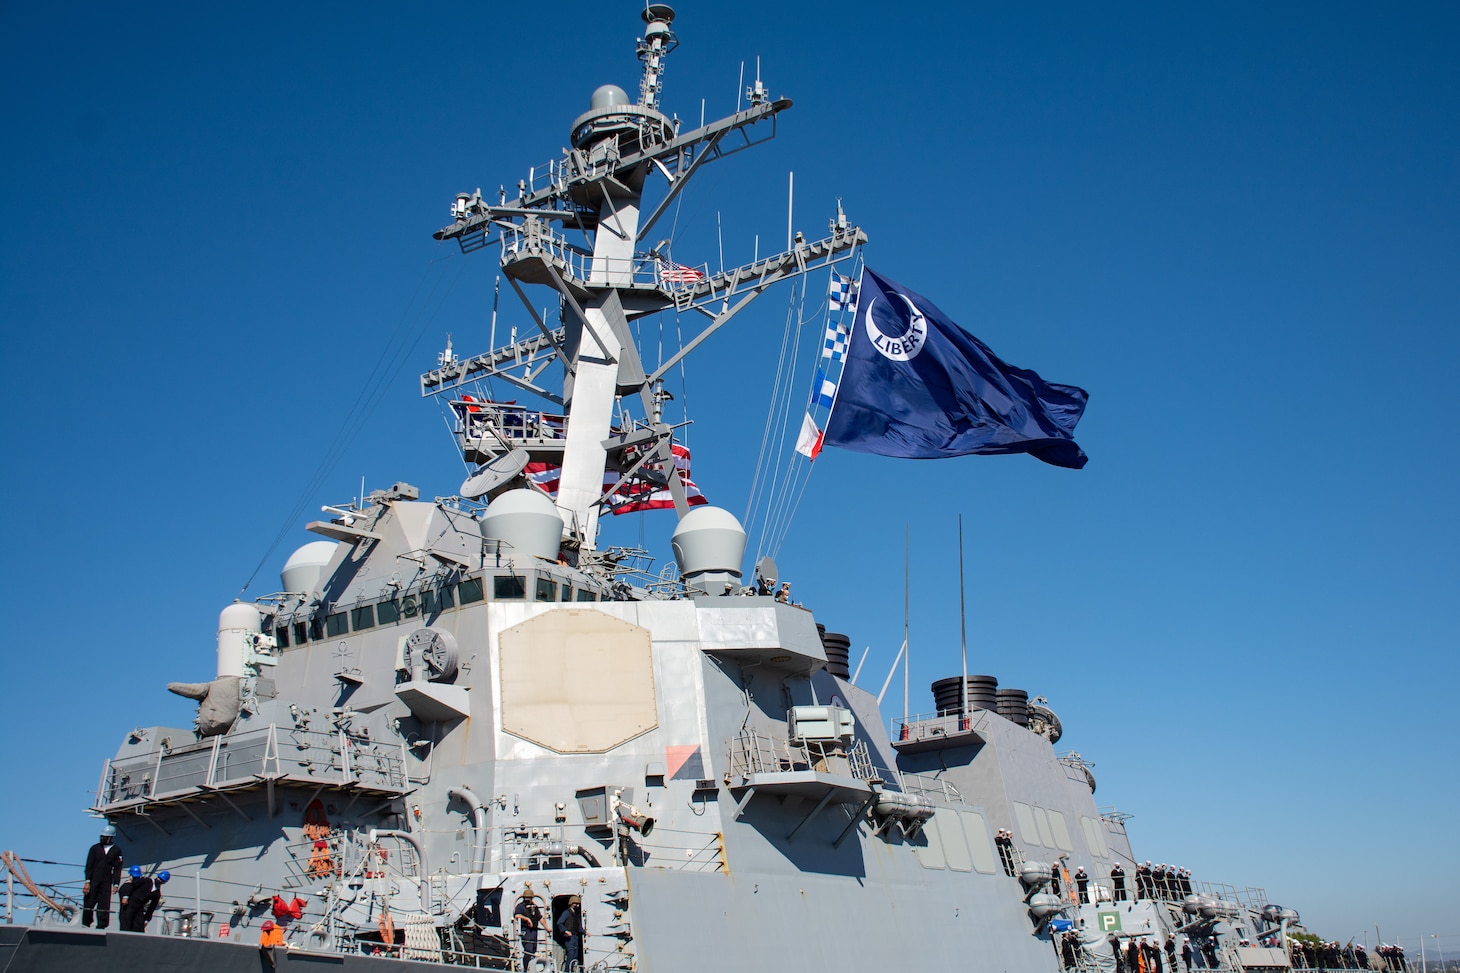 Guided-missile destroyer USS Paul Hamilton (DDG 60) returns to its homeport of San Diego